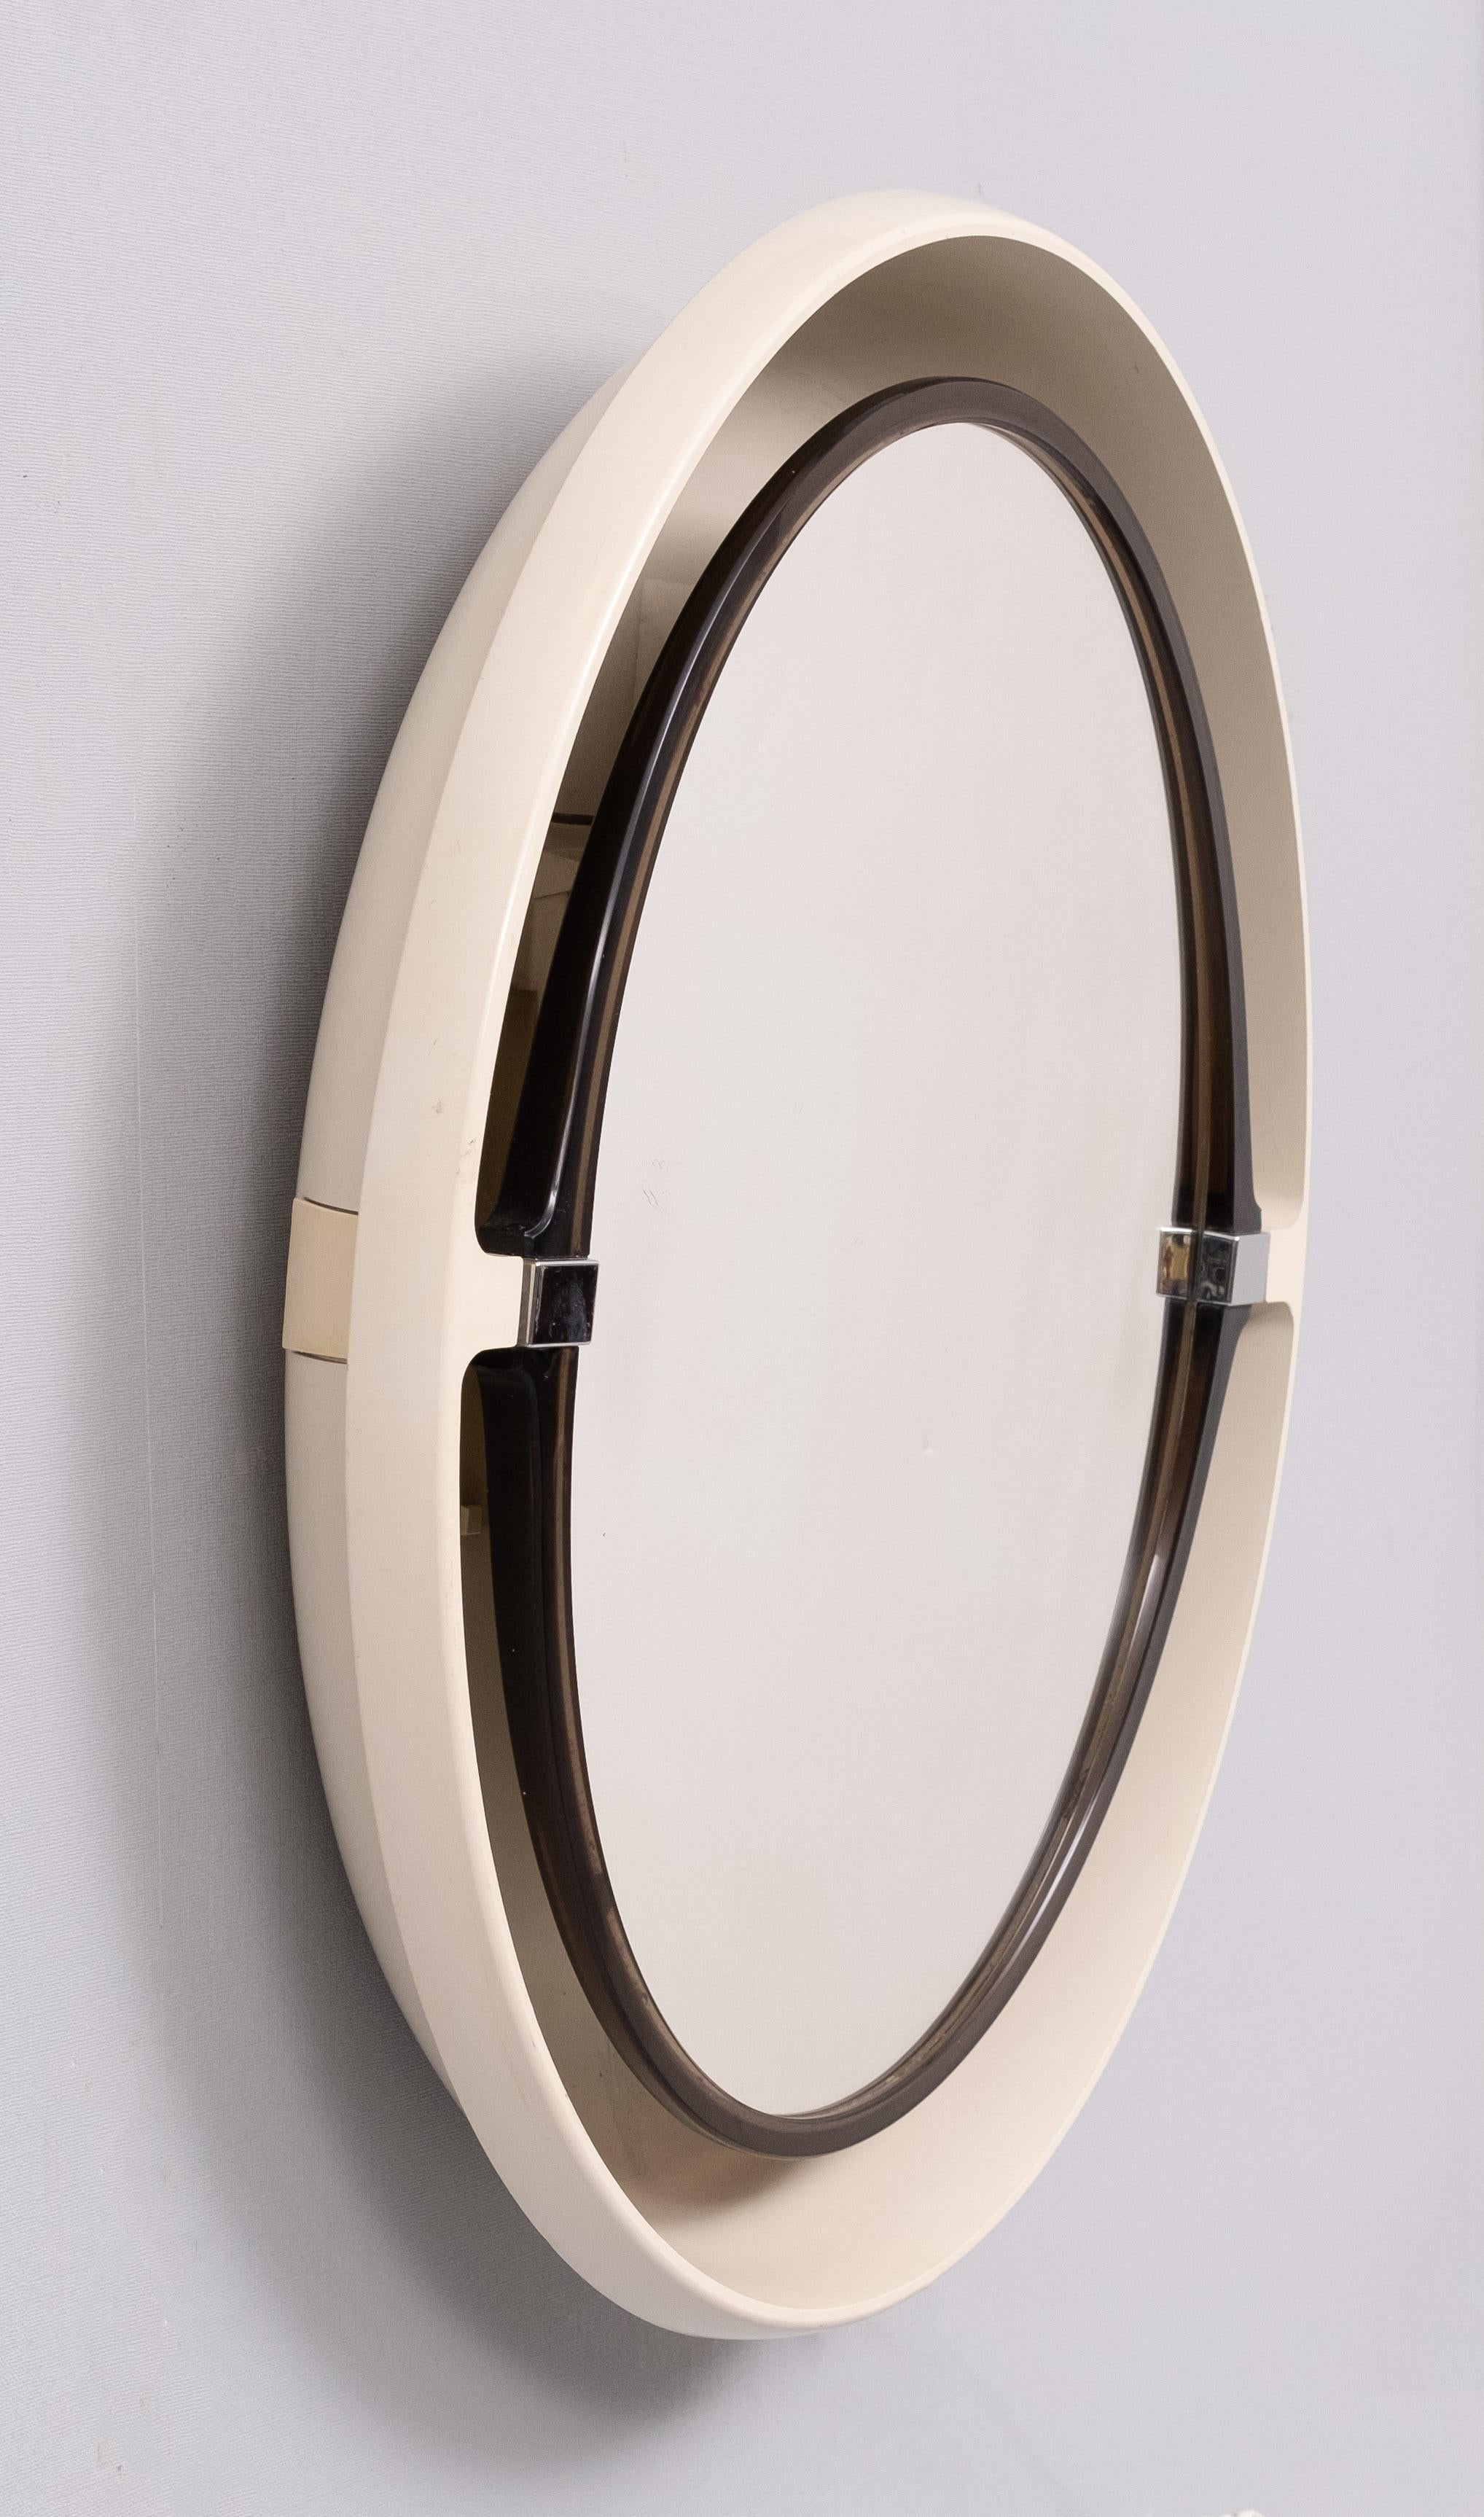 Vintage Oval shaped tilting Mirror . Back Lid whit 4 Bulbs .  
Manufactured by Allibert France . Pull down switch . 
Can be  used in the Bathroom . some wear on the mirror . 
